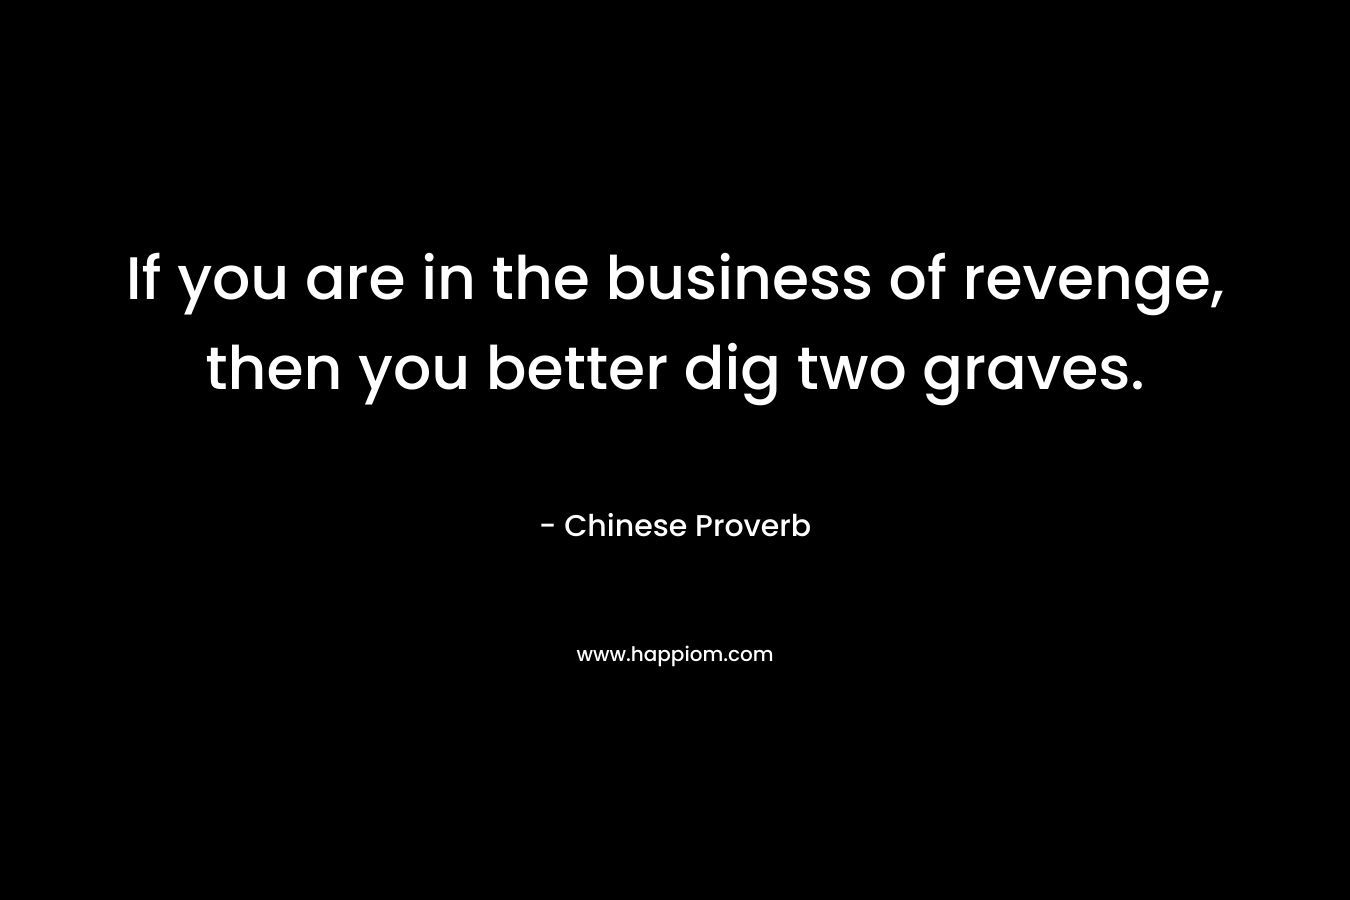 If you are in the business of revenge, then you better dig two graves. – Chinese Proverb